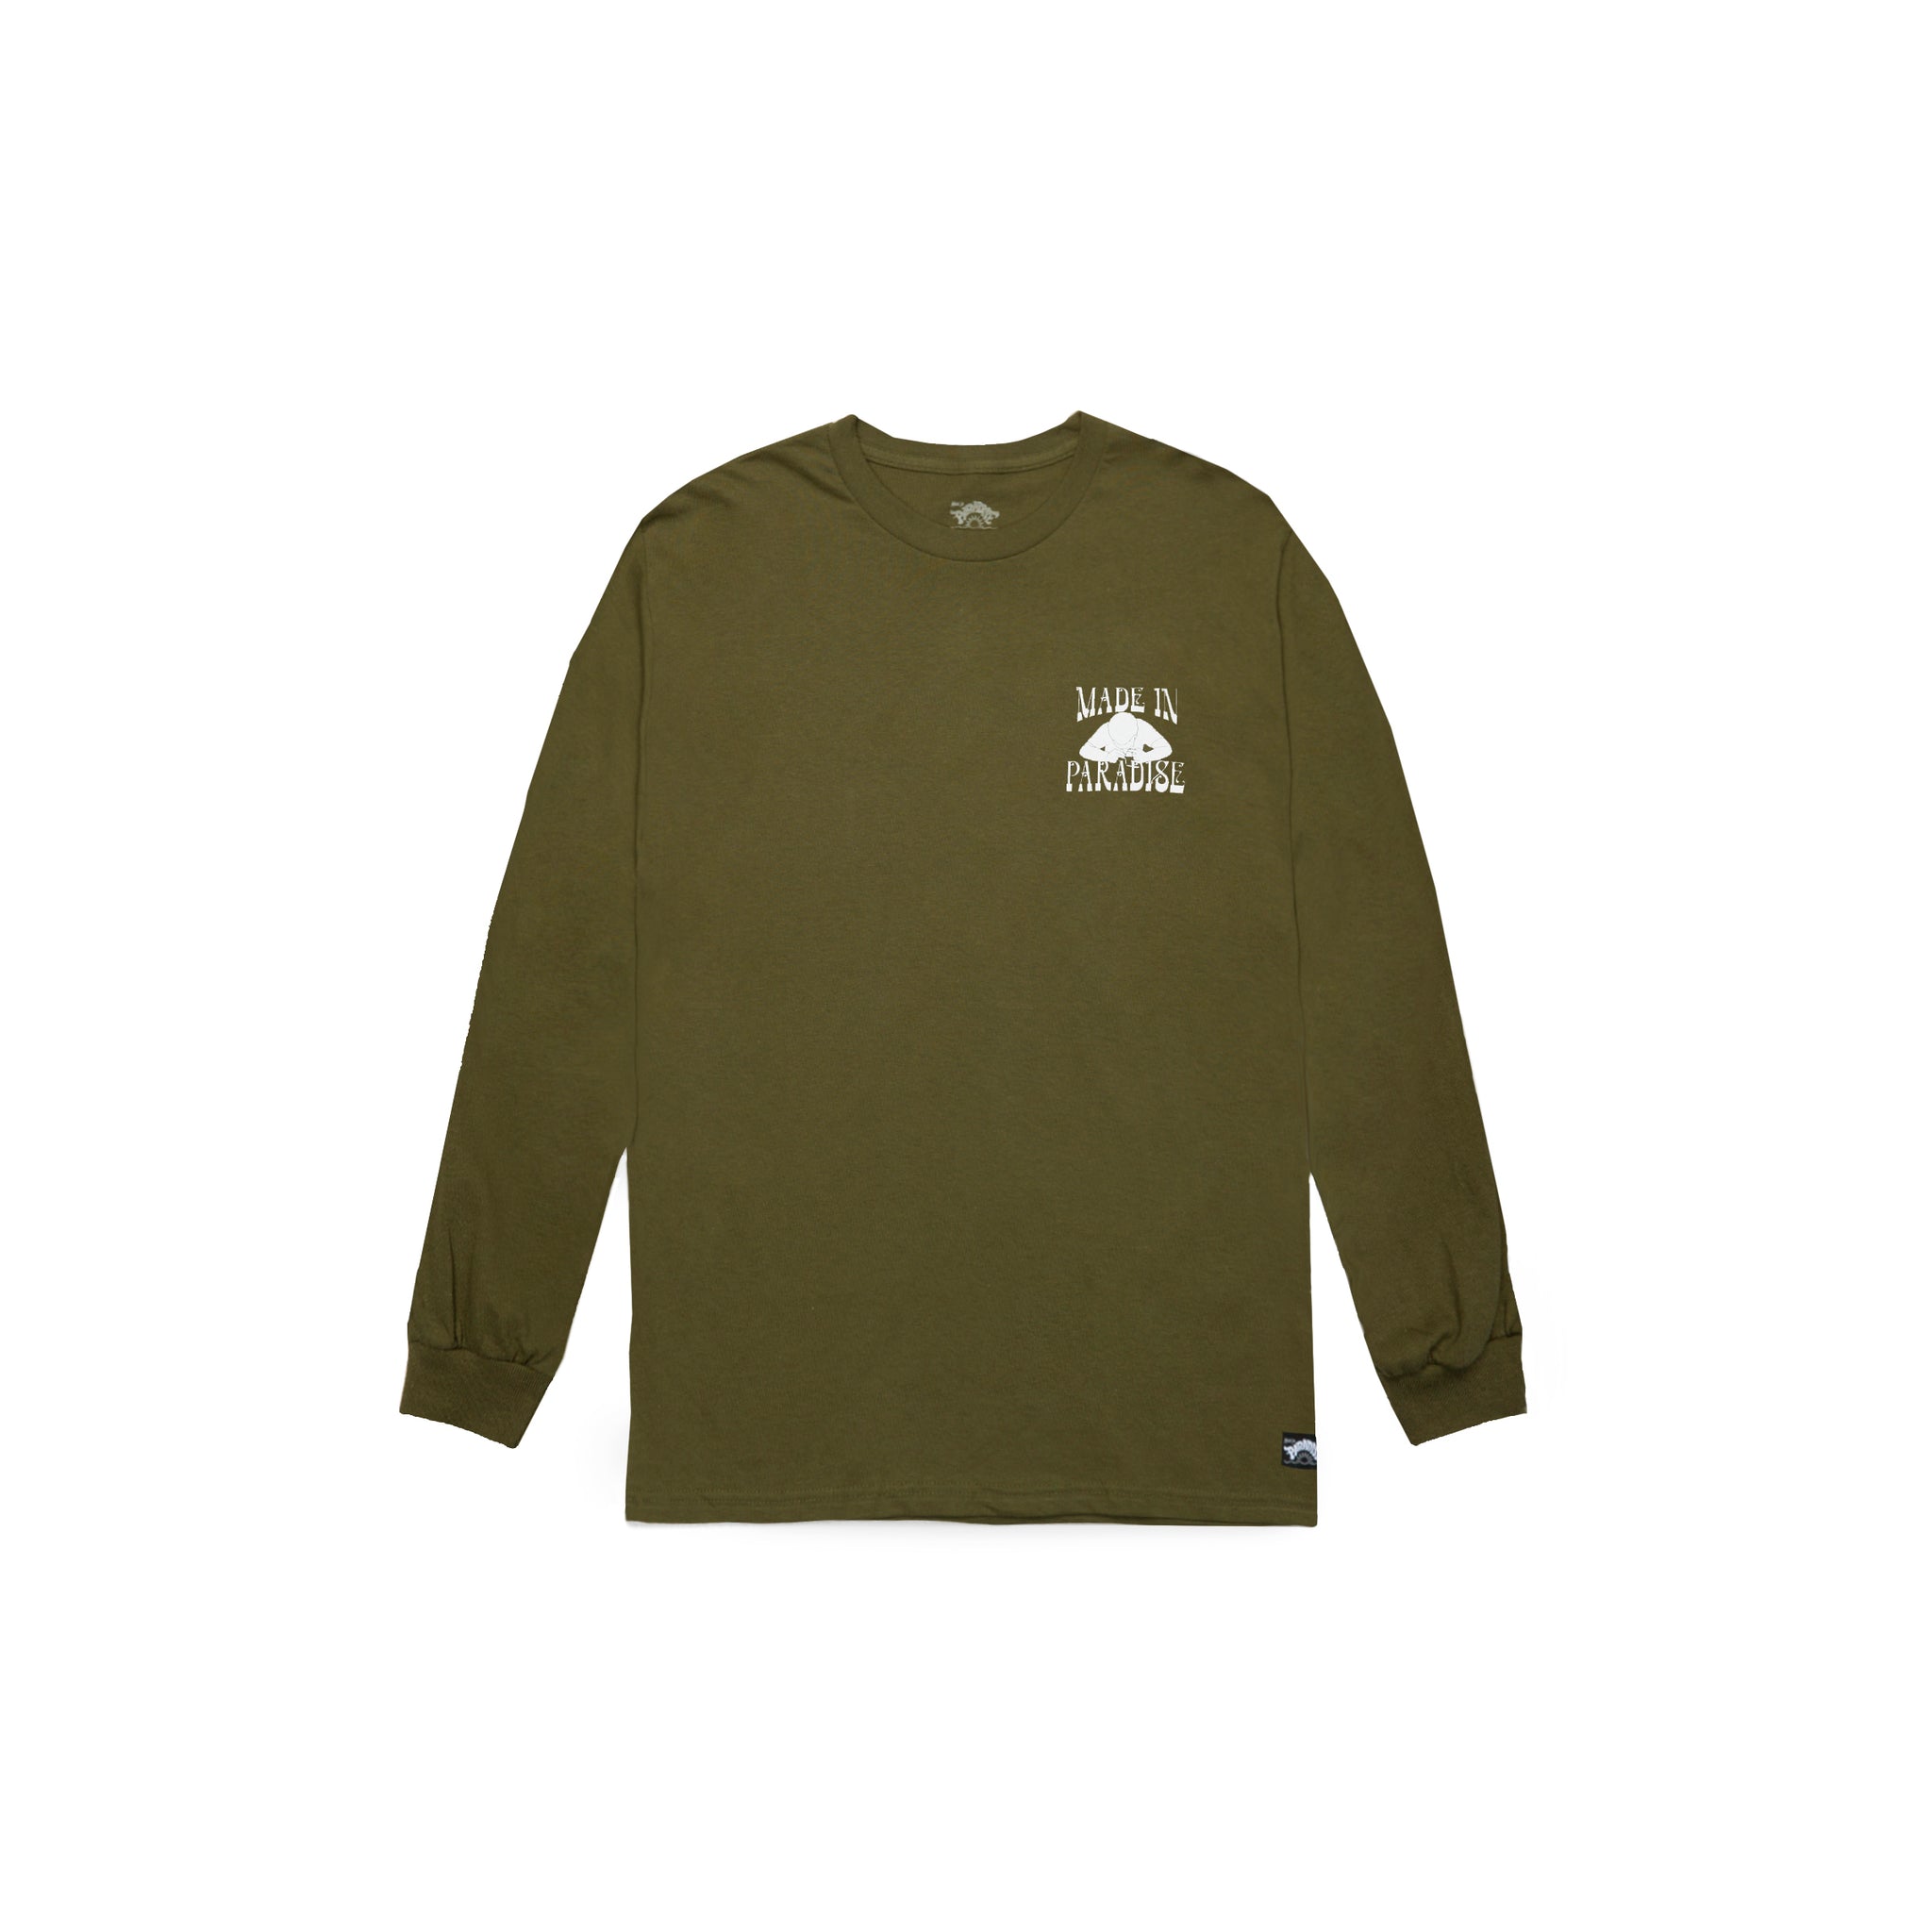 Front view of Made in Paradise World Drug Trade Collection "COCAINE PRICES" green olive long sleeve t-shirt